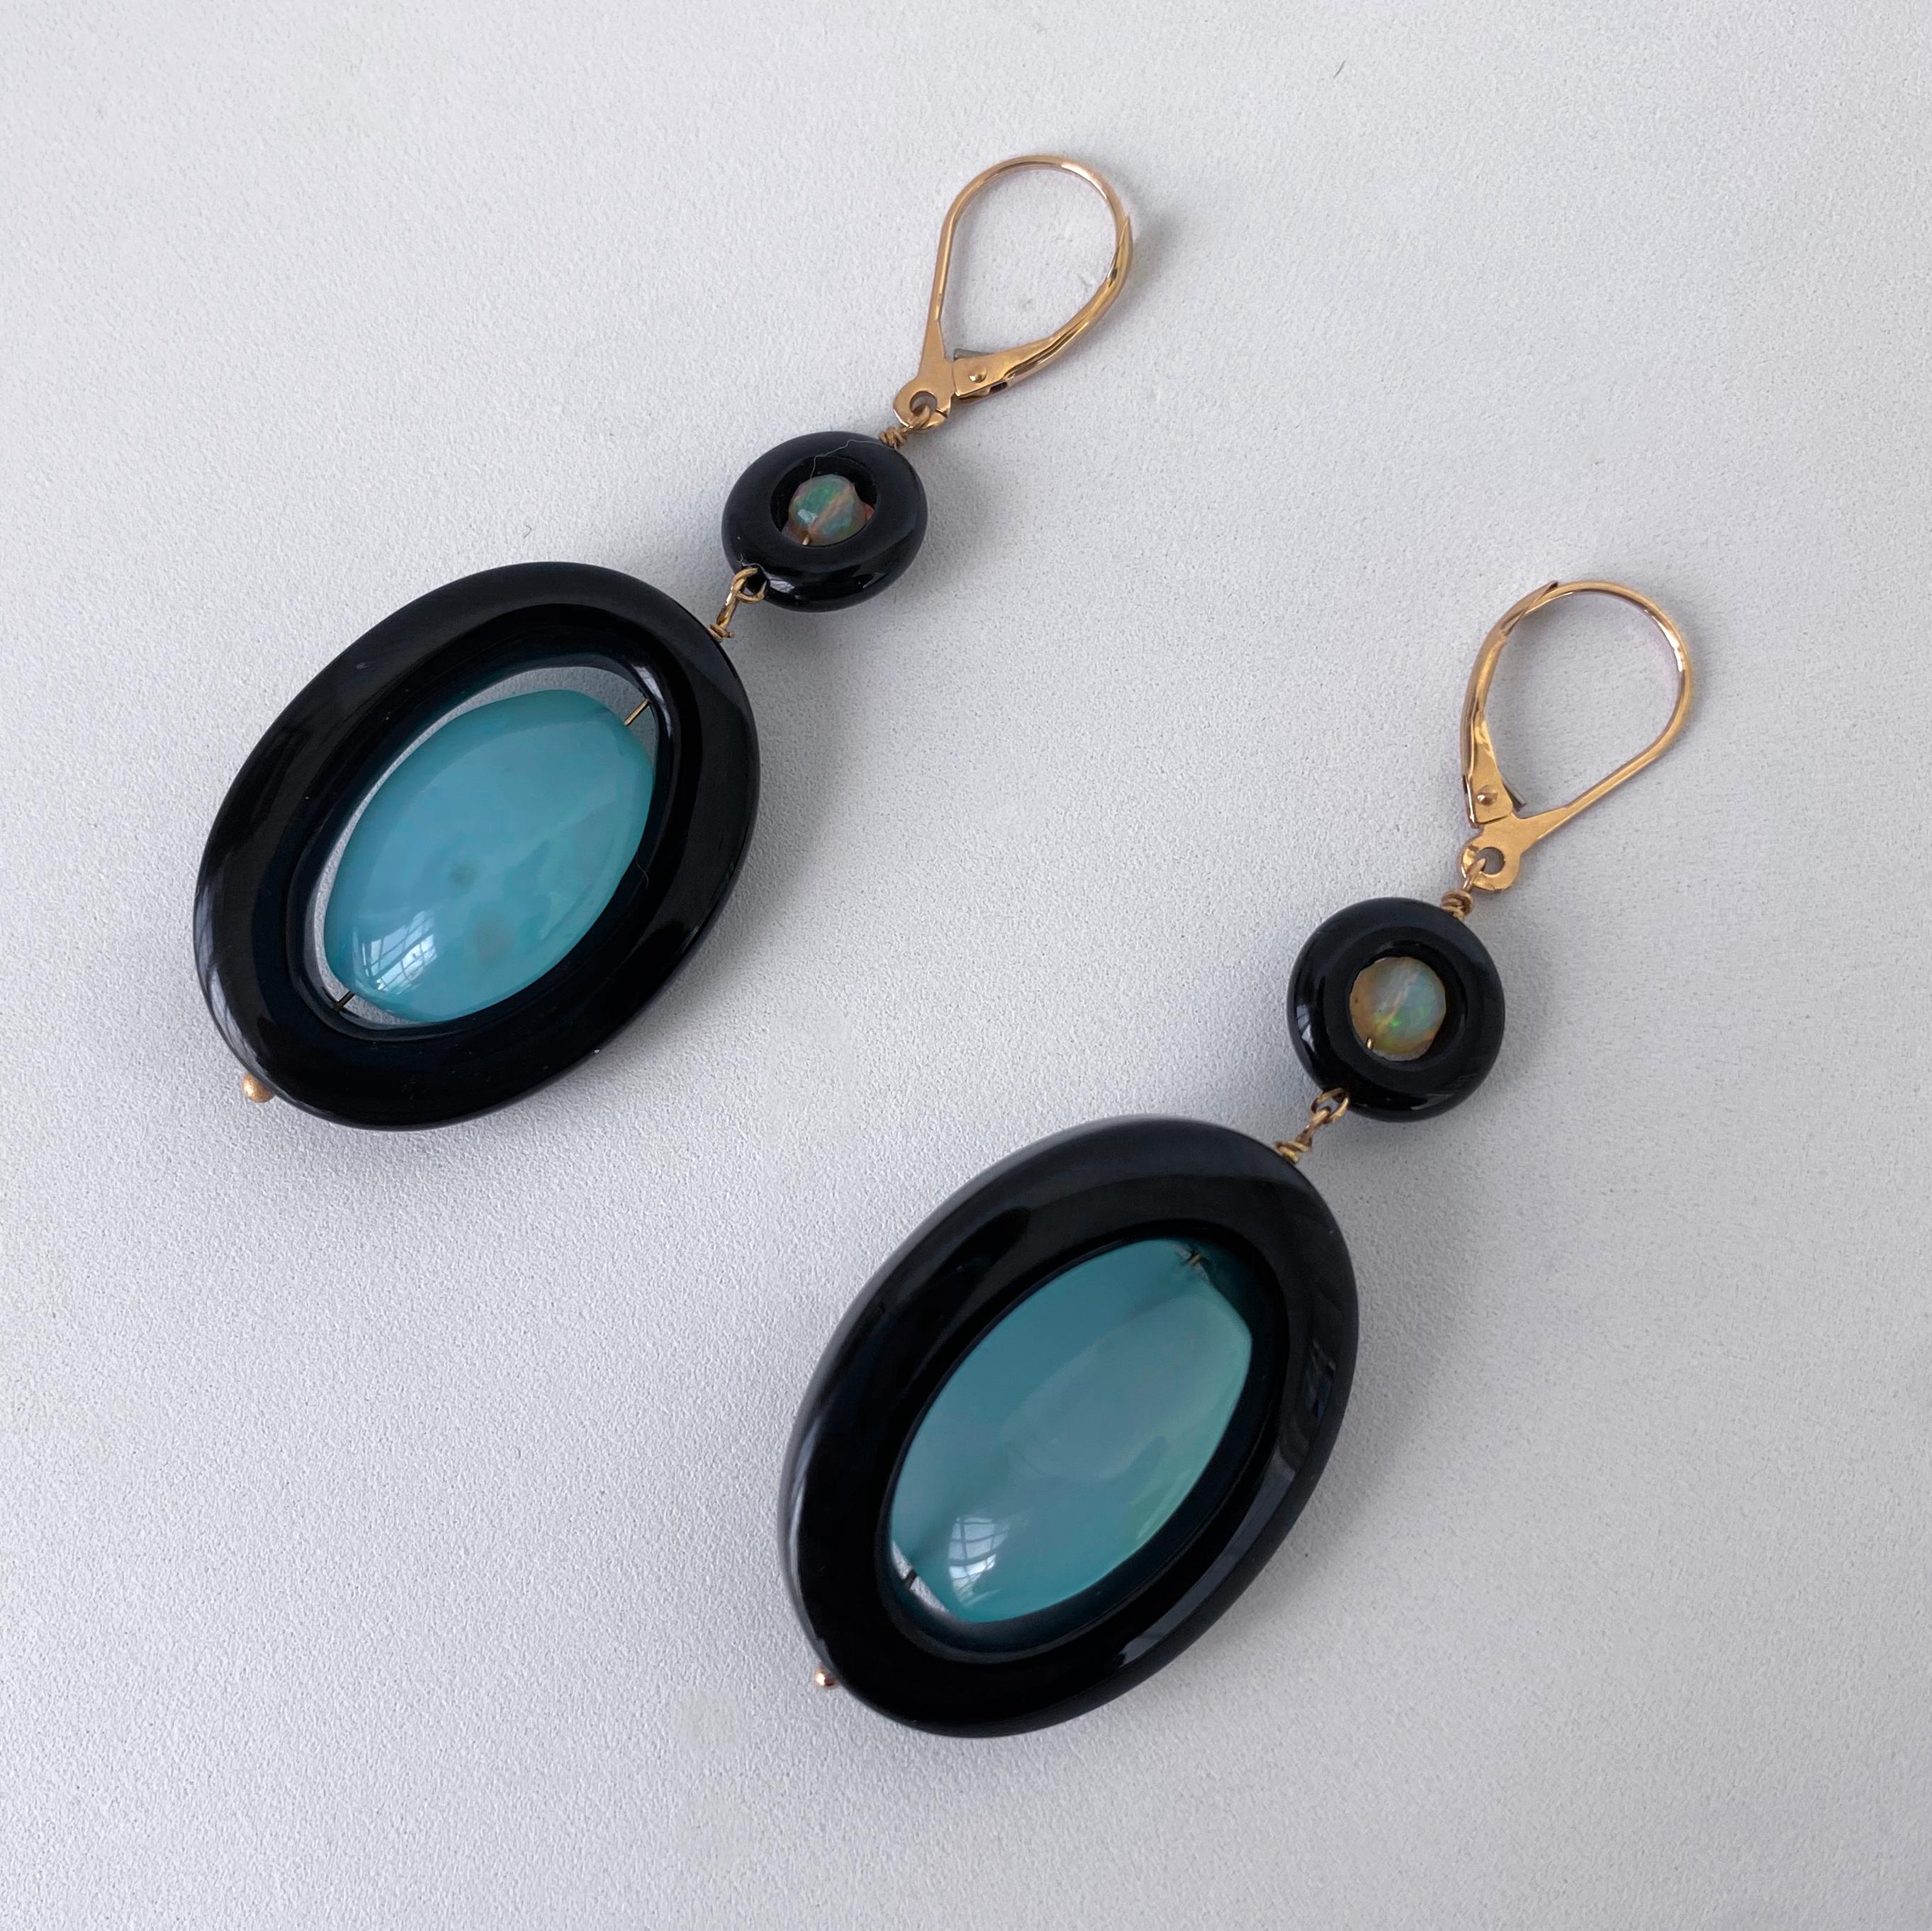 Beautiful pair of Earrings by Marina J.
Measuring 2.5 inches long, this pair is made with all solid 14k Yellow Gold wiring and Lever Back Hooks. Faceted Fire Opal and Faceted Chalcedony sit within high gloss Black Onyx Donut beads. Due to their semi